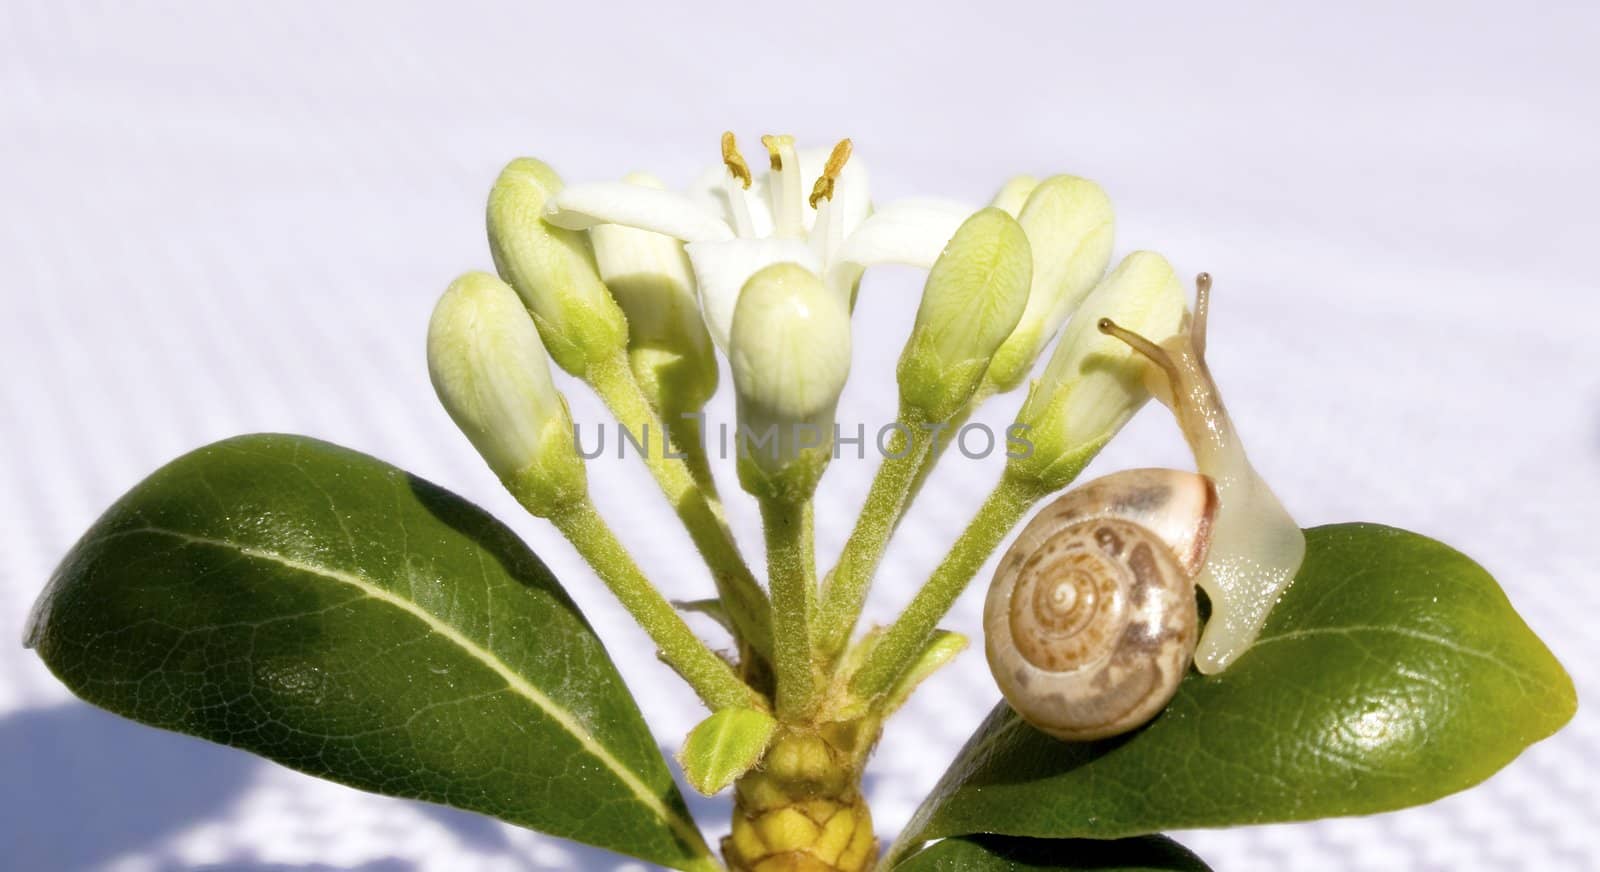 Small snail looking to white flower